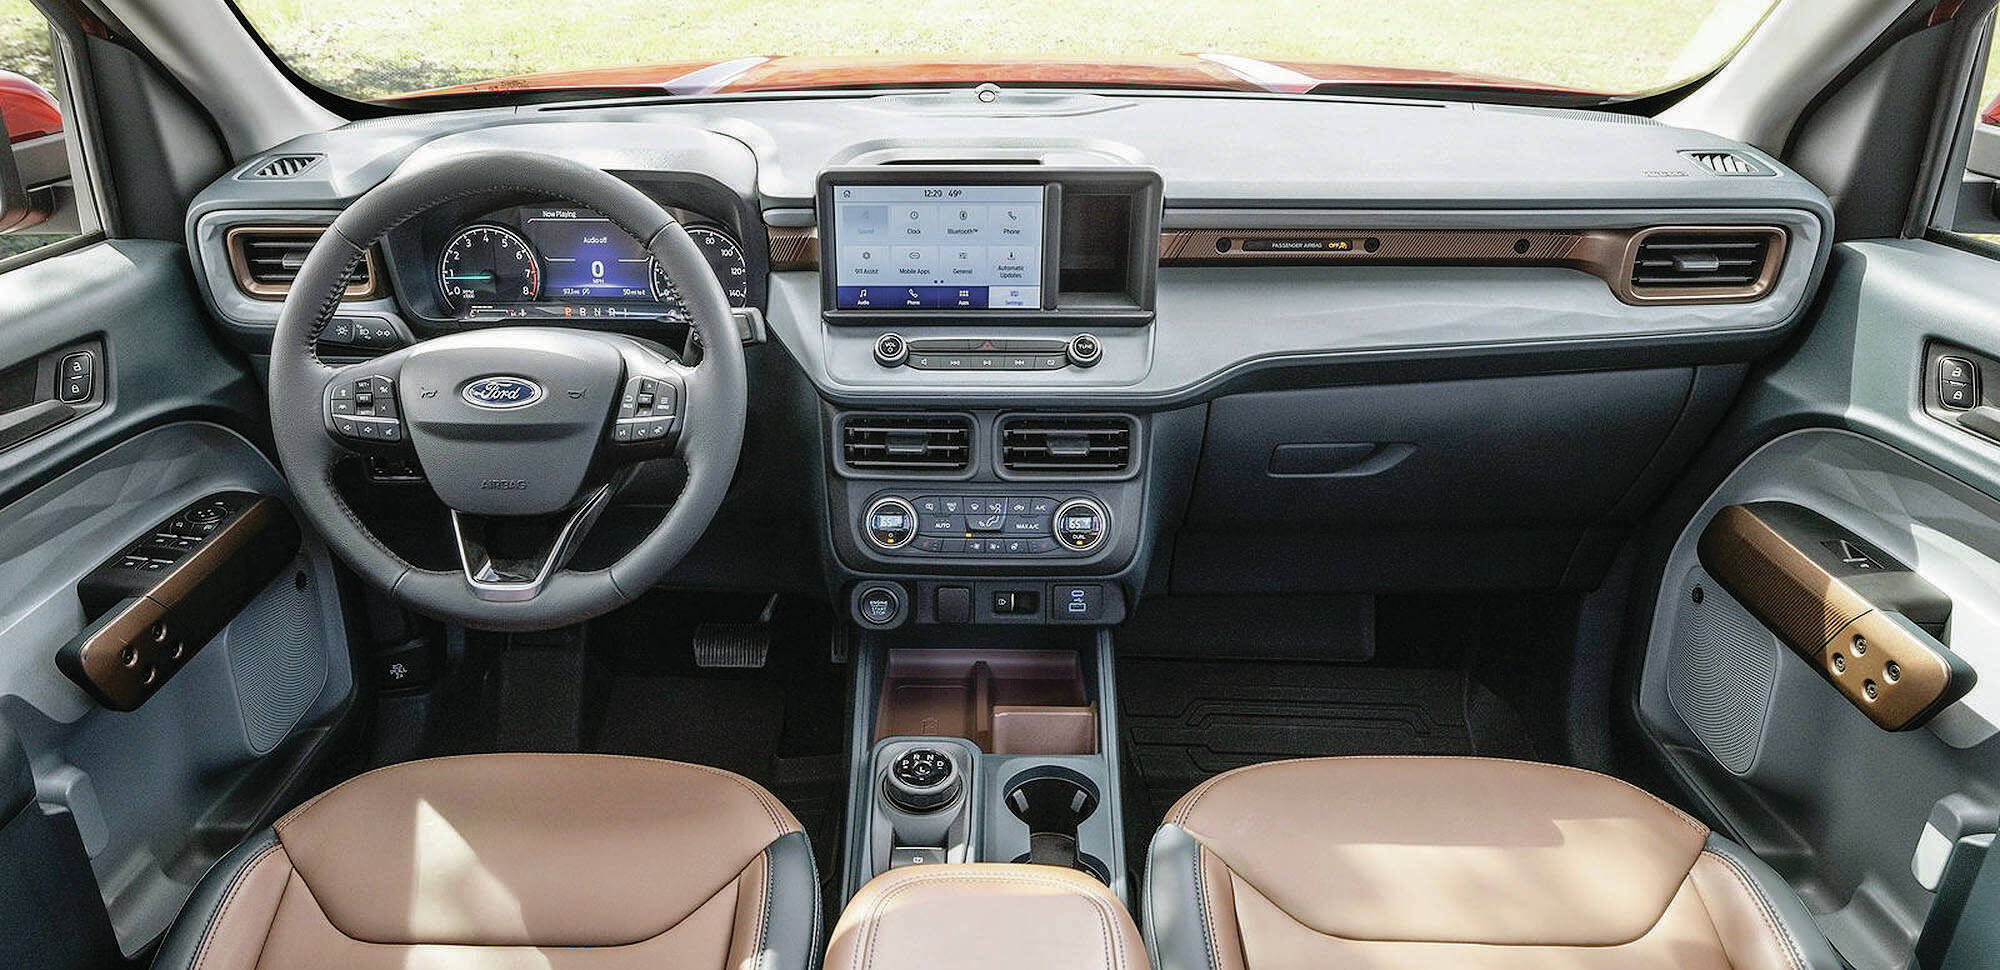 The interior gives off a minimalist vibe that fits nicely with the Mavericks purpose in life and its base price is below the $30,000 threshold in Canada.